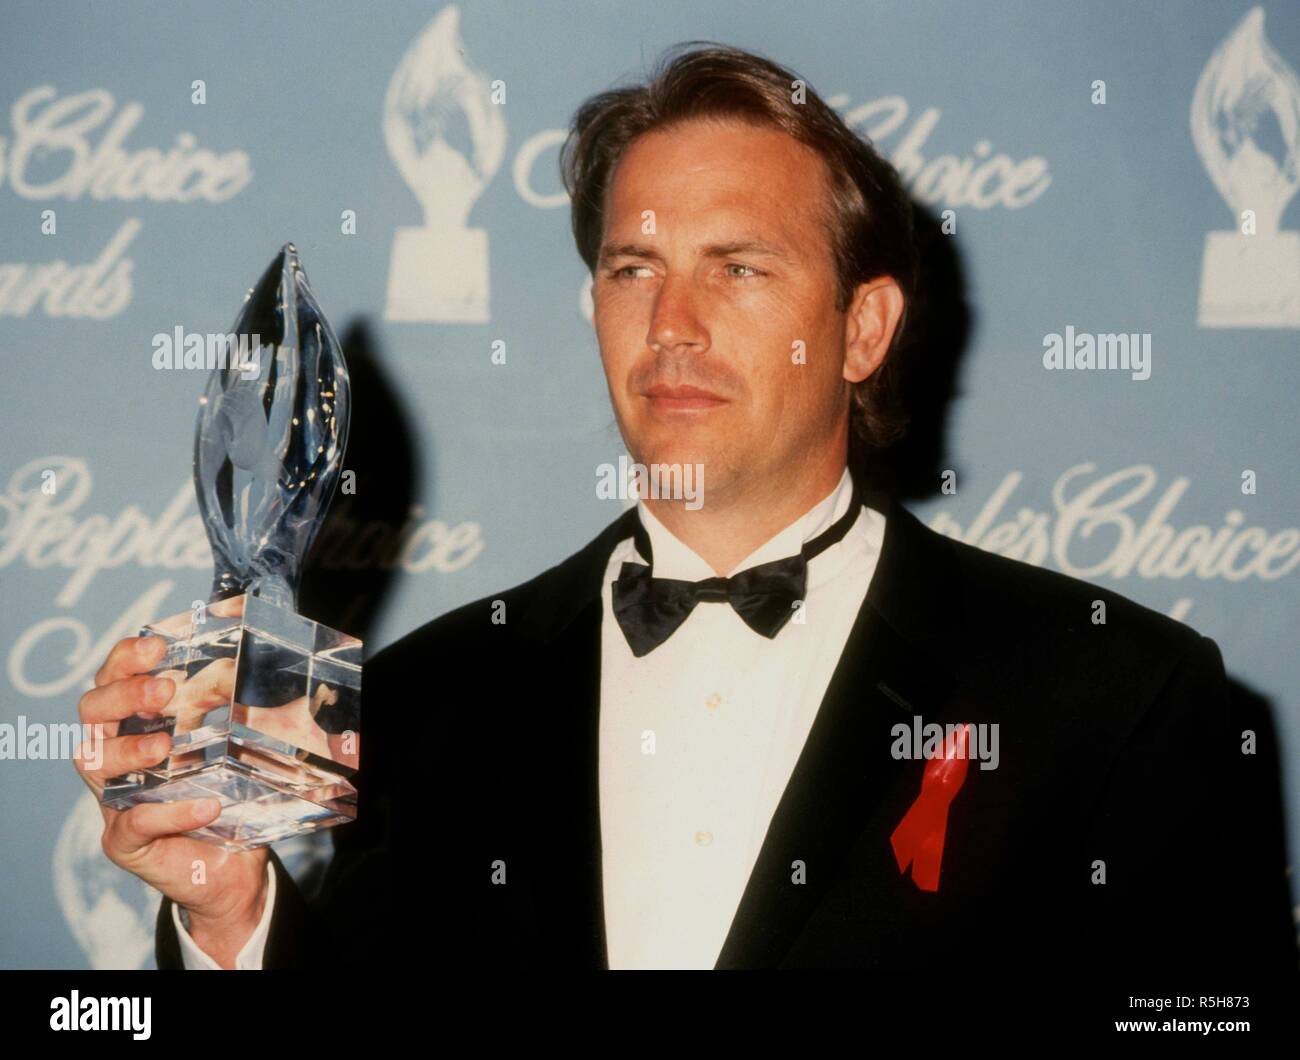 UNIVERSAL CITY, CA - MARCH 9: Actor Kevin Costner attends the 19th Annual People's Choice Awards on March 9, 1993 at Unversal Studios in Universal City, California. Photo by Barry King/Alamy Stock Photo Stock Photo